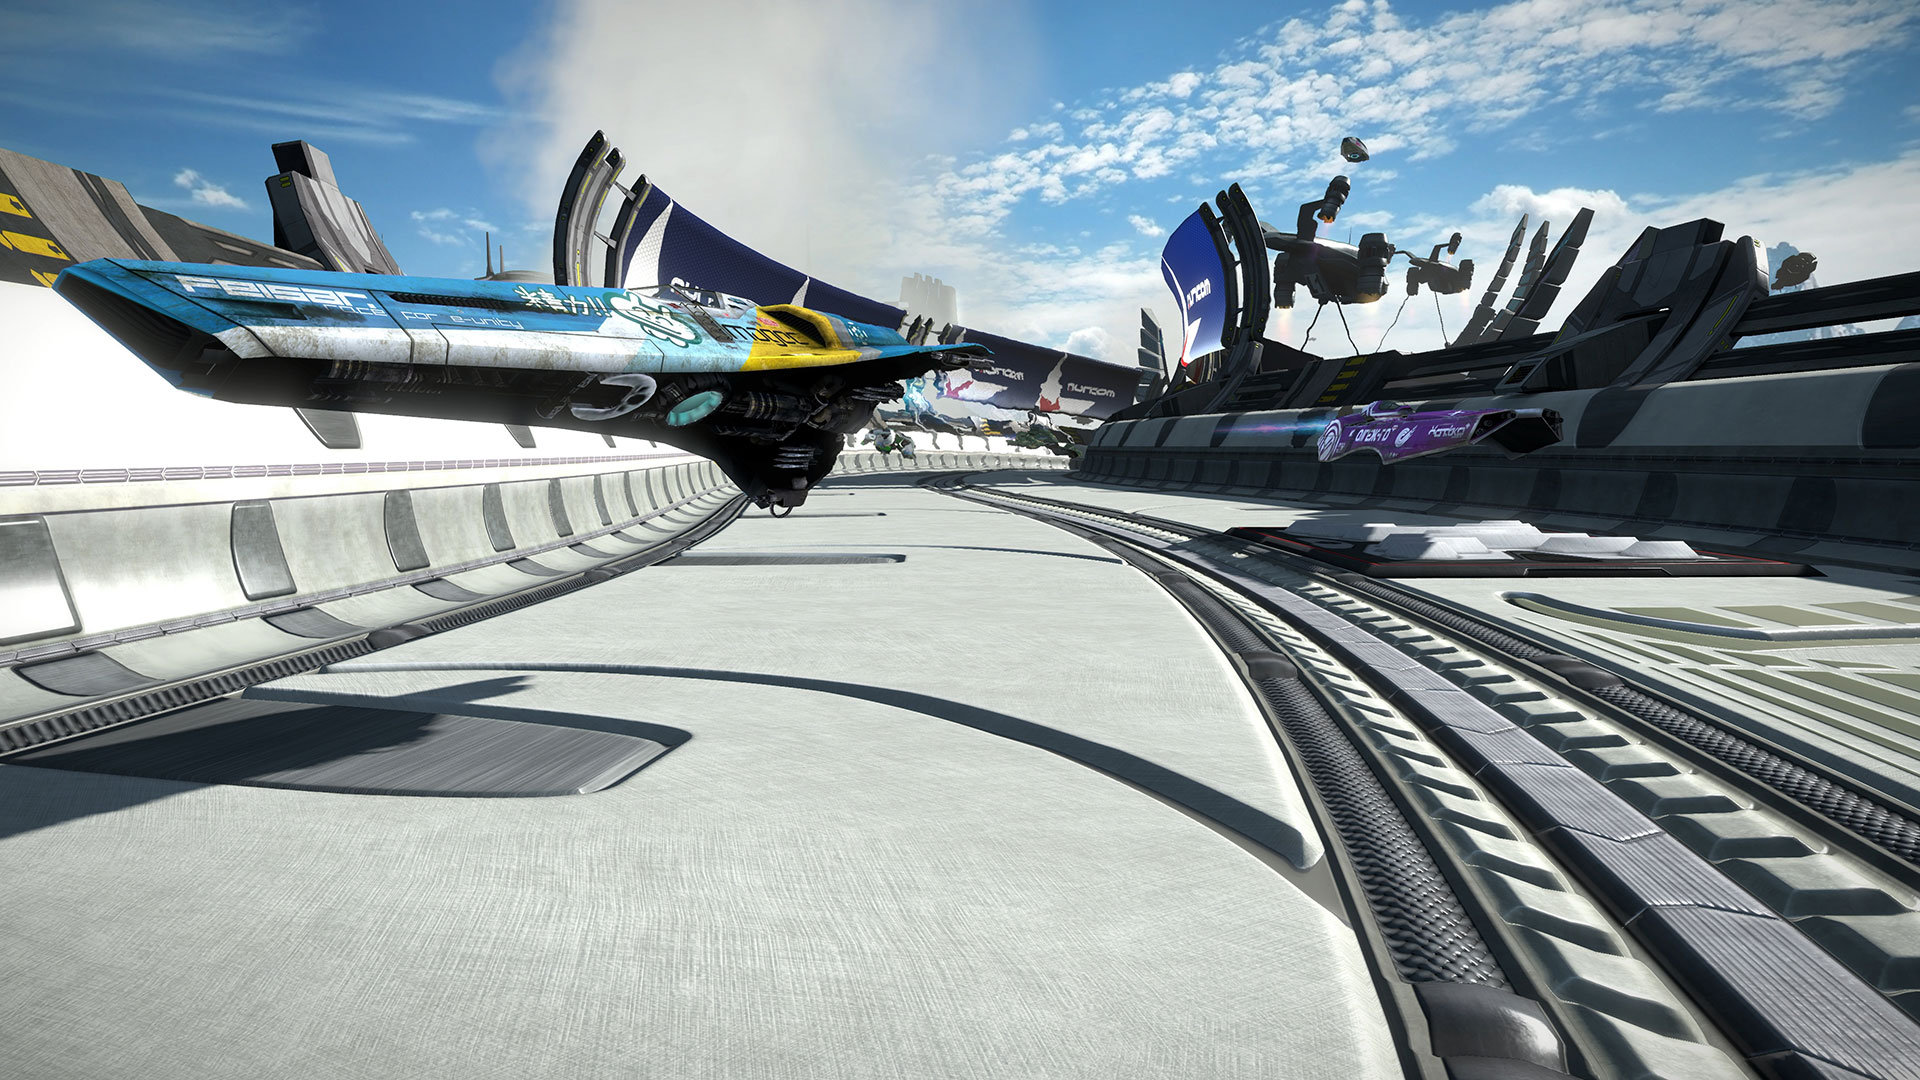 Media asset in full size related to 3dfxzone.it news item entitled as follows: Wipeout Omega Collection: Sony pubblica trailer, screenshots e data di lancio | Image Name: news26090_Wipeout-Omega-Collection_8.jpg